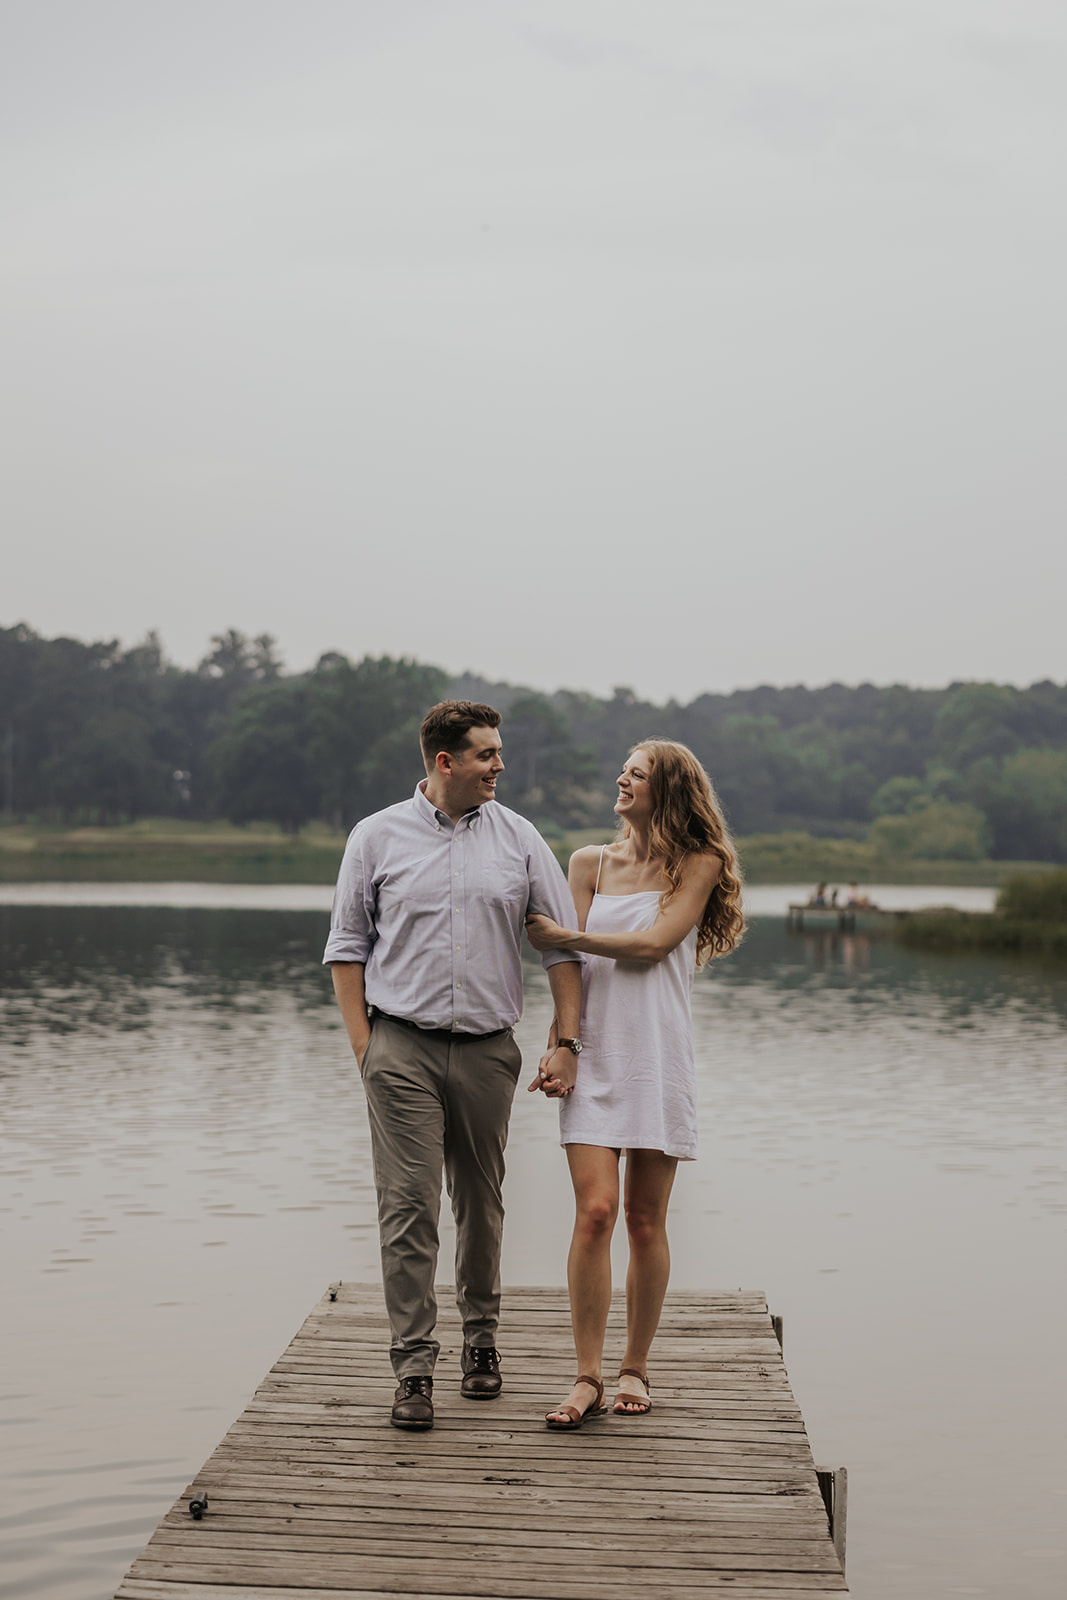 Stunning couple walk towards the camera during their engagement photoshoot on a dock in Georgia.